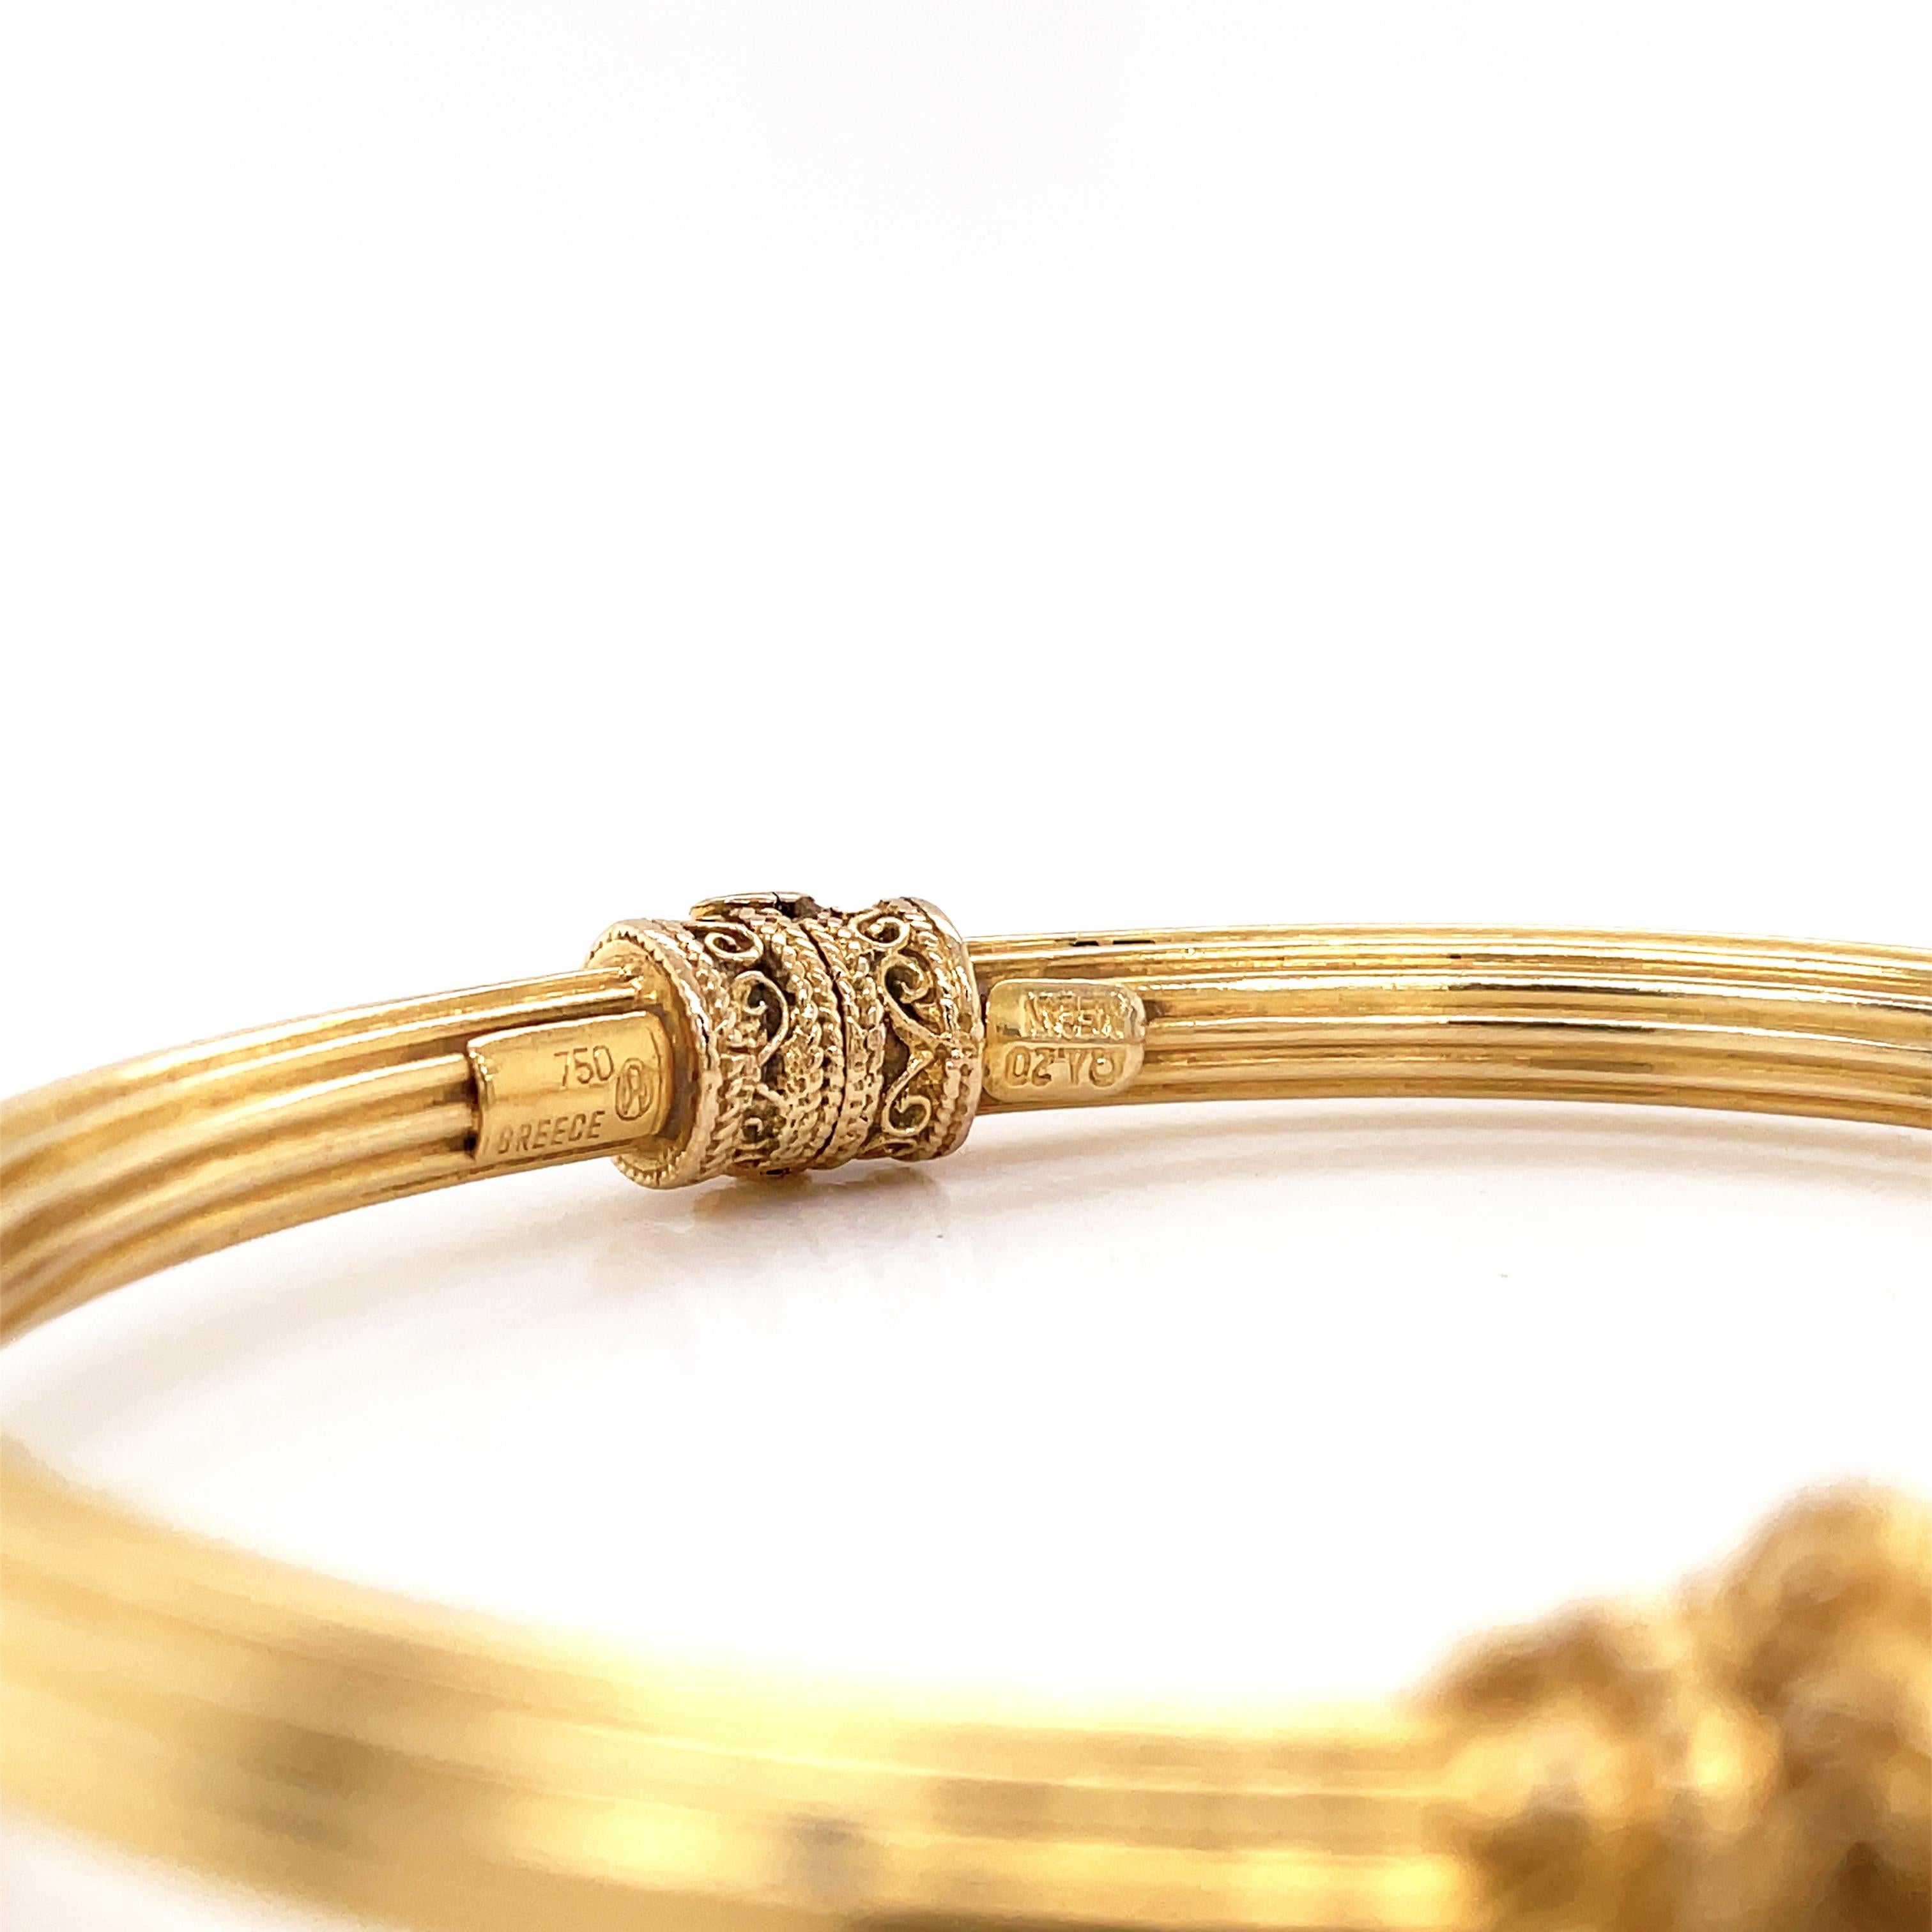 Pin by anjali agarwal on Fine jewelry | Mens bracelet gold jewelry, Mens  gold bracelets, Man gold bracelet design